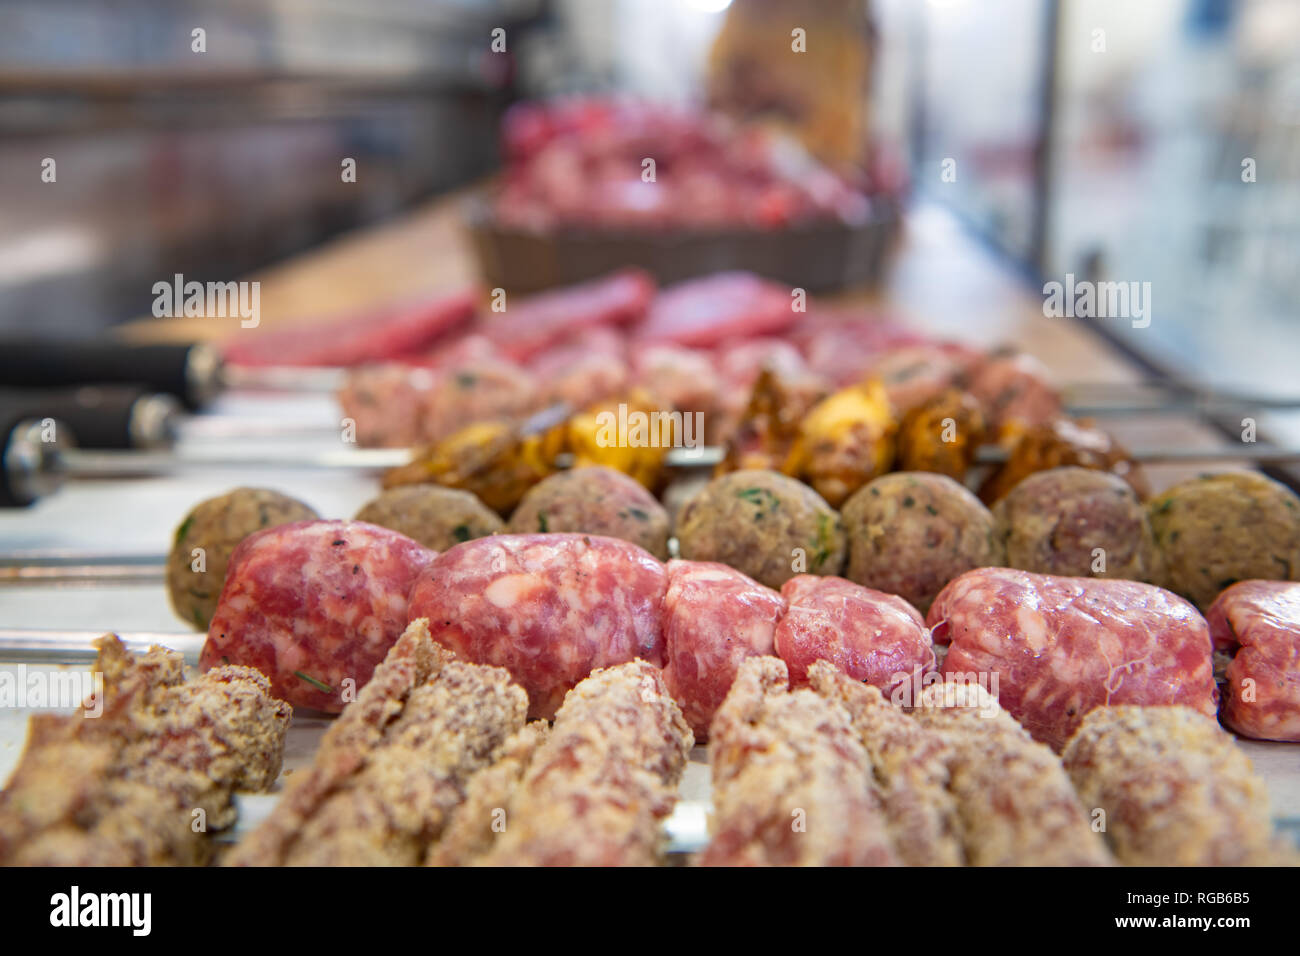 Detail of fresh raw sausages skewer and other variations of prepared meat in butcher shop counter focus on foreground Stock Photo